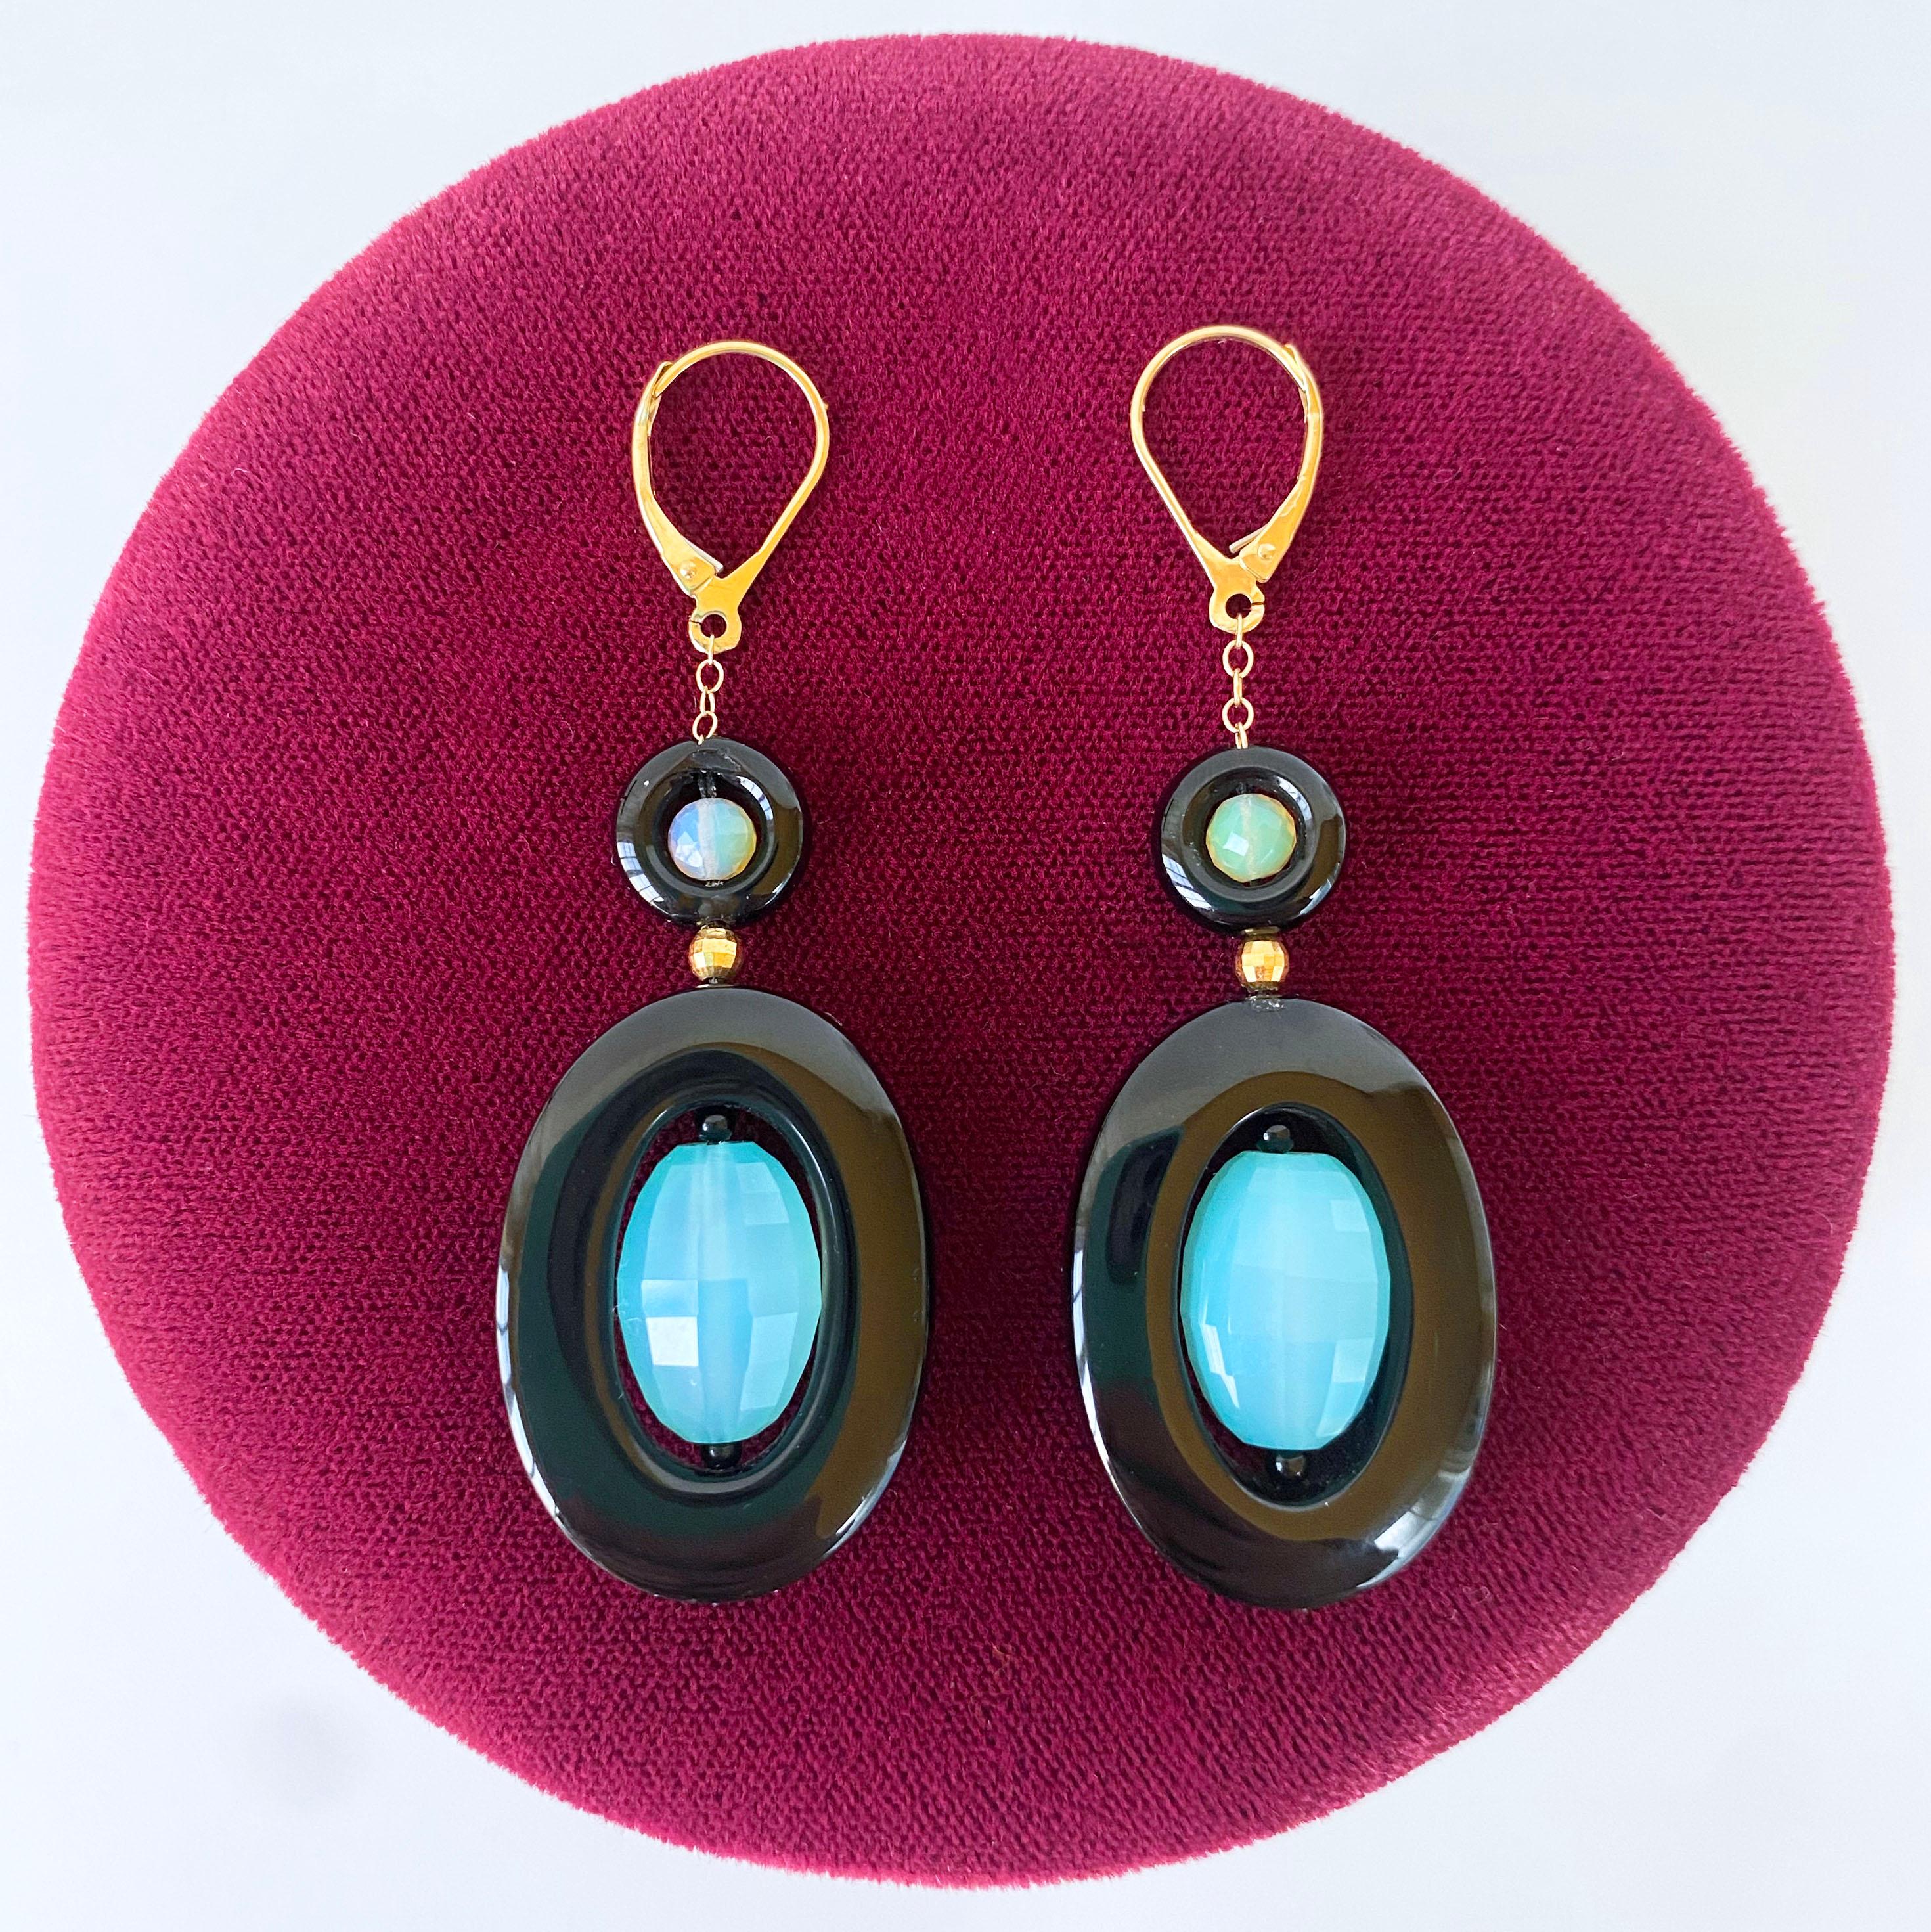 Gorgeous pair of Dangle Earrings by Marina J. This pair is made with all solid 14k Yellow Gold Hooks, Wiring and Chain. This pair features two Black Onyx donuts filled with a Faceted Fire Opal & Faceted Aqua Apatite, separated by a Faceted Solid 14k